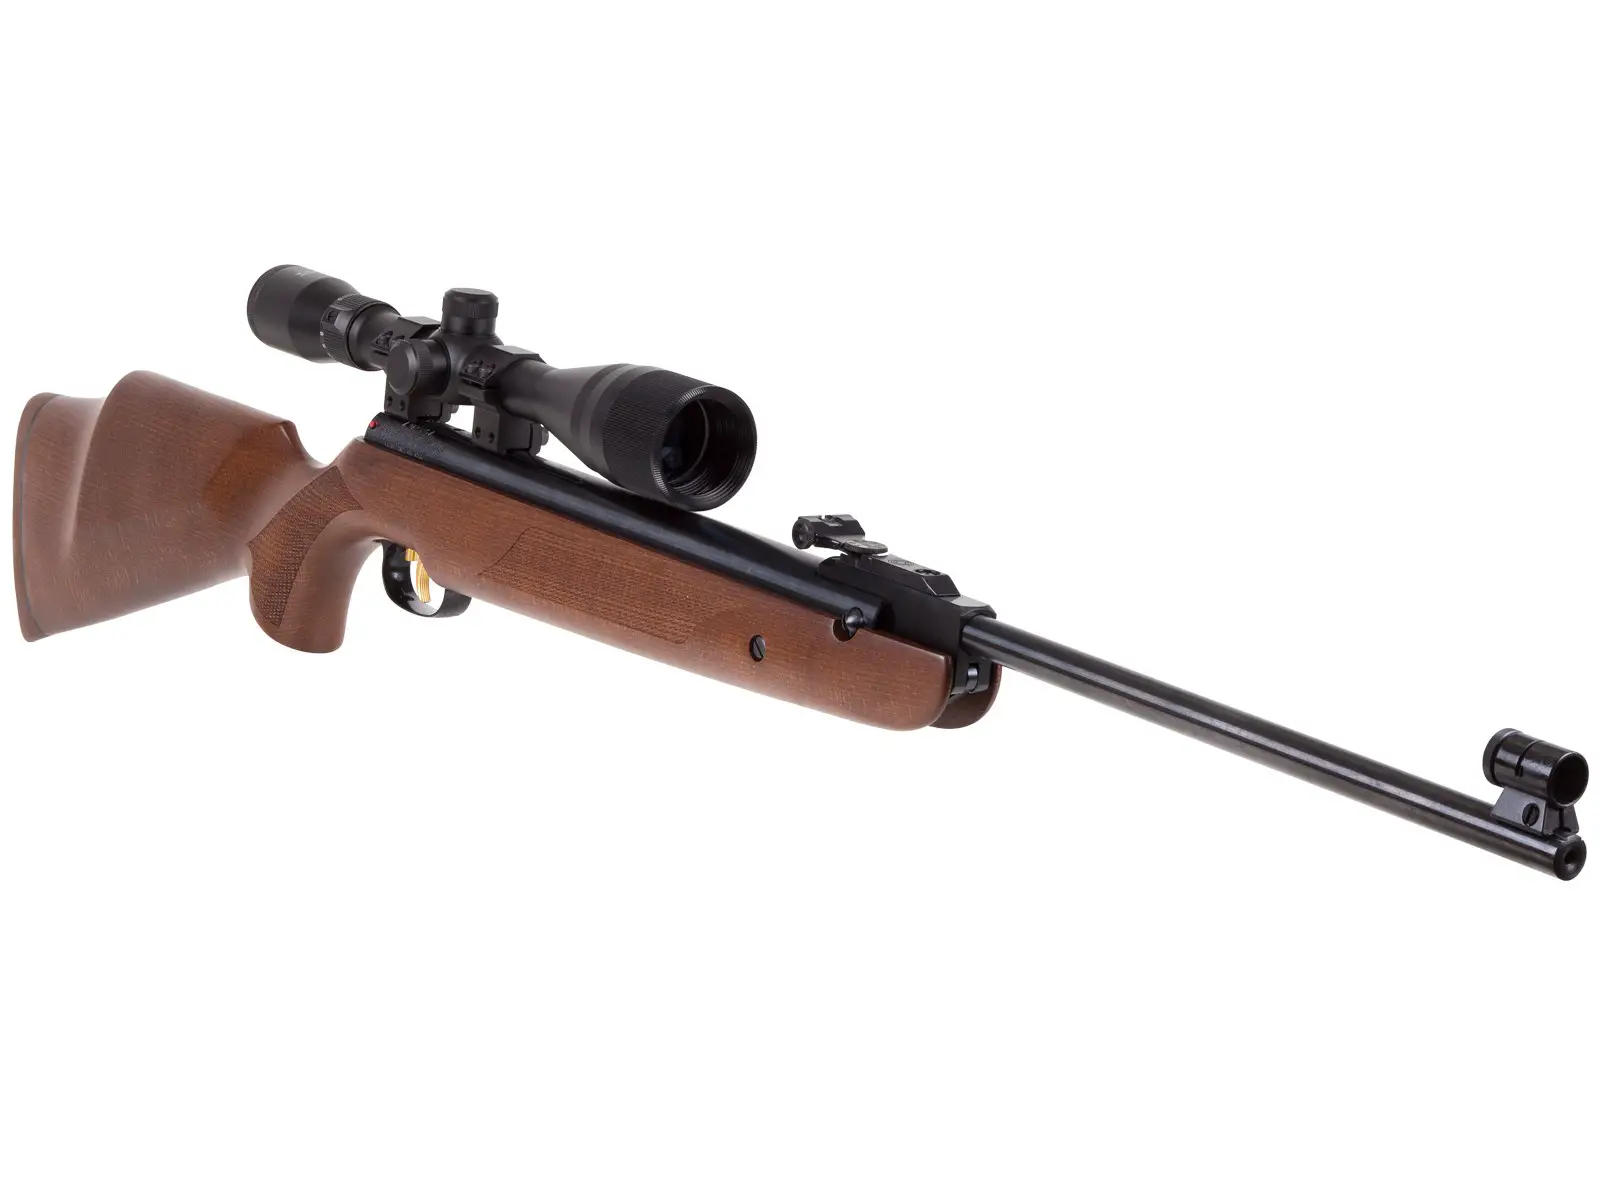 b2 2 Best Air Rifles 2023 - The Most Exciting Guns to Have (Reviews and Buying Guide)